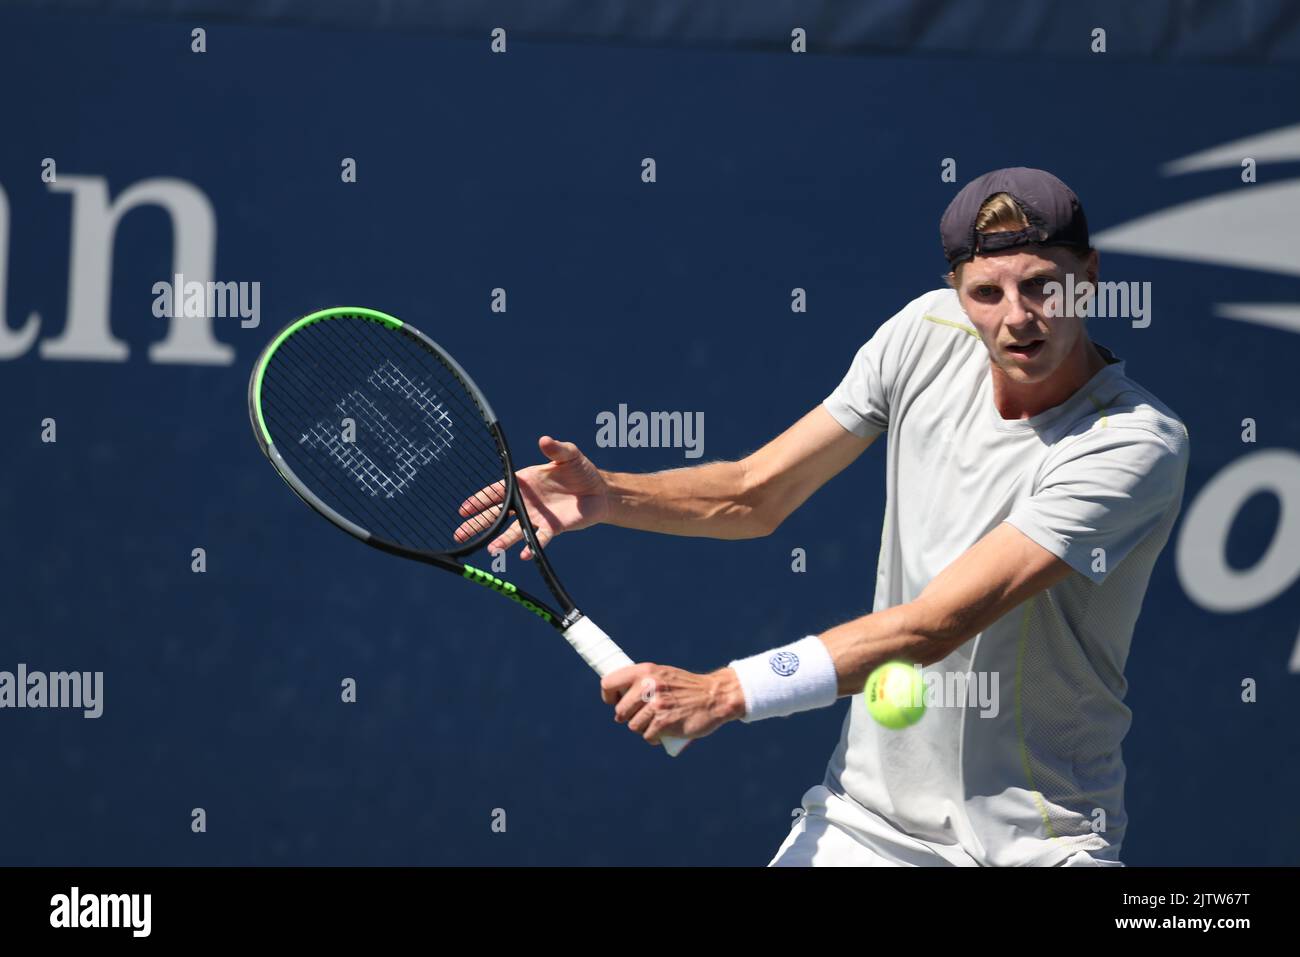 NEW YORK, NY - September 1: Gijs Brouwer of the Netherlands during his match against Lorenzo Musetti of Italy at USTA Billie Jean King National Tennis Center on September 1, 2022 in New York City. (Photo by Adam Stoltman/BSR Agency) Credit: BSR Agency/Alamy Live News Stock Photo